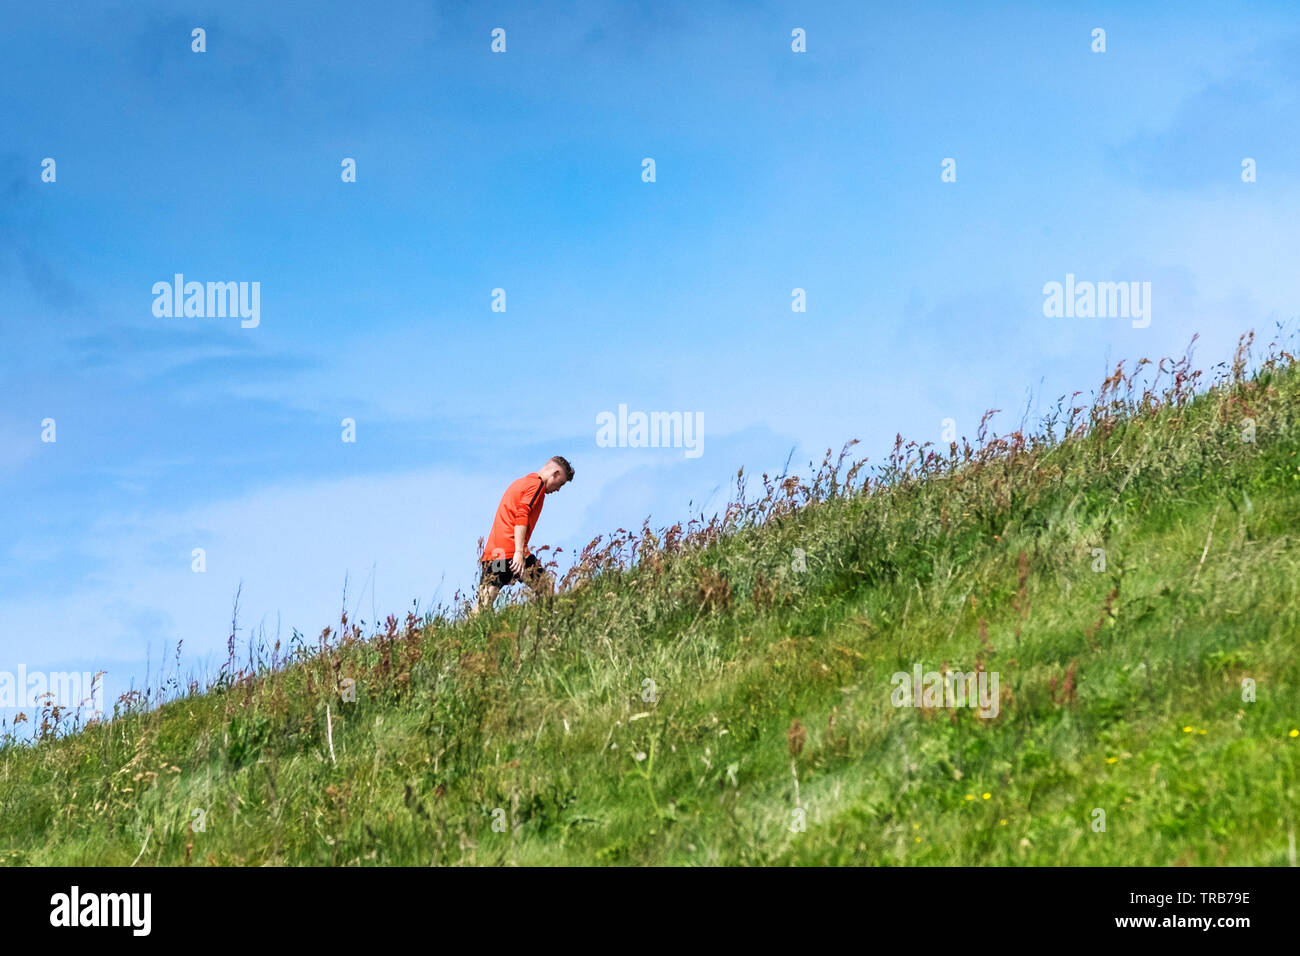 A man wearing a bright red top seen against a blue sky walking up a steep grass covered slope in the countryside. Stock Photo